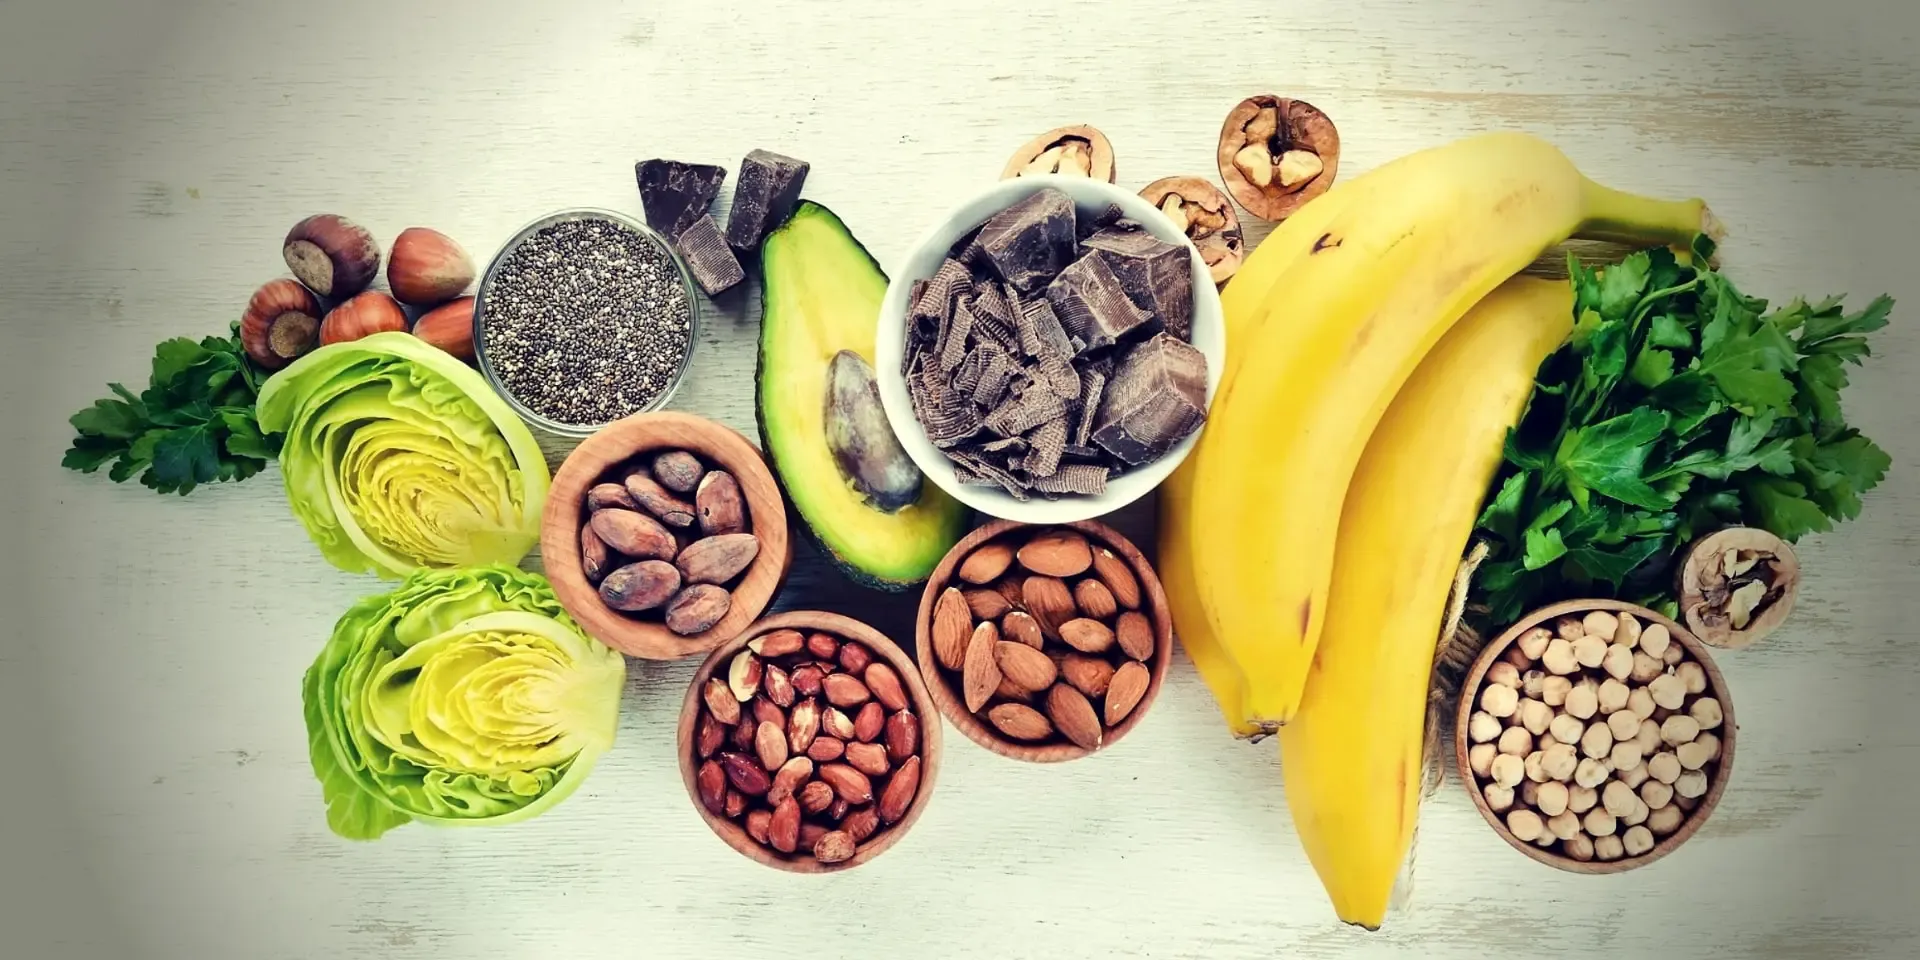 Magnesium and Testosterone foods containing natural magnesium. Chocolate, banana, cocoa, nuts, avocados, broccoli, almonds